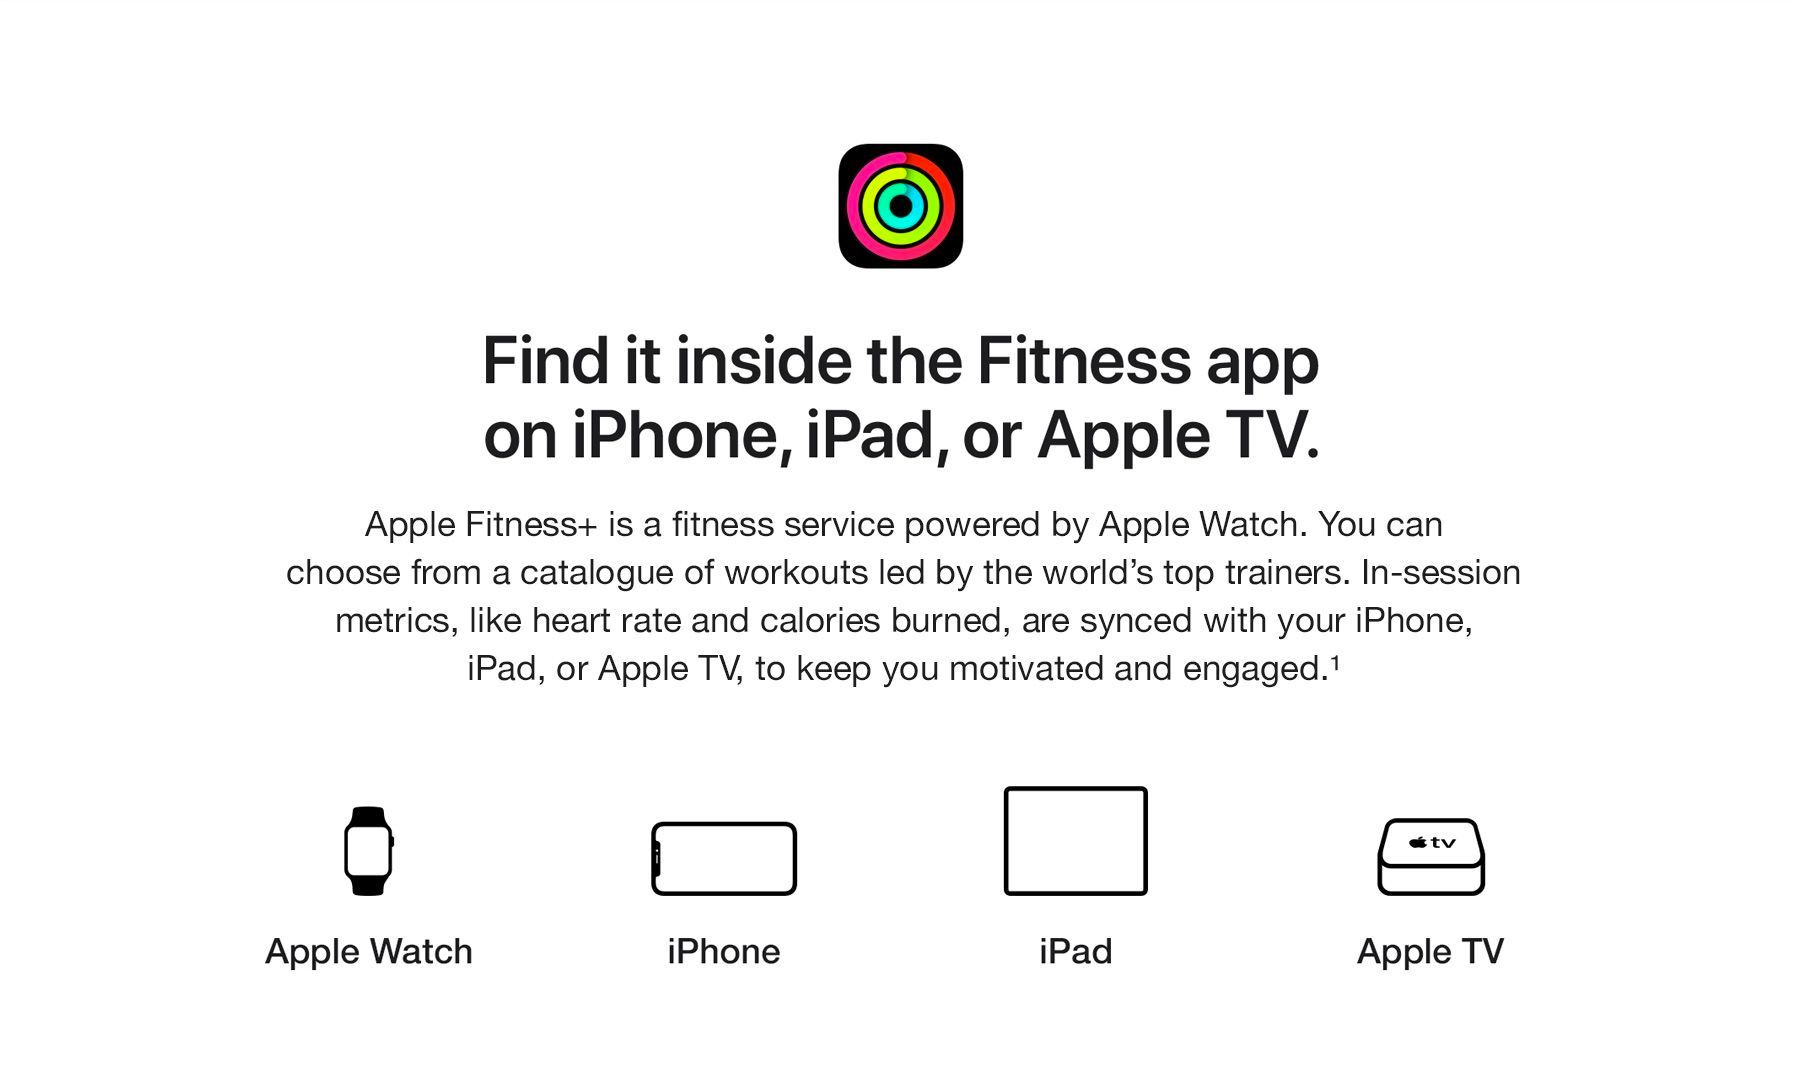 Find it inside the Fitness app on iPhone, iPad, or Apple TV.